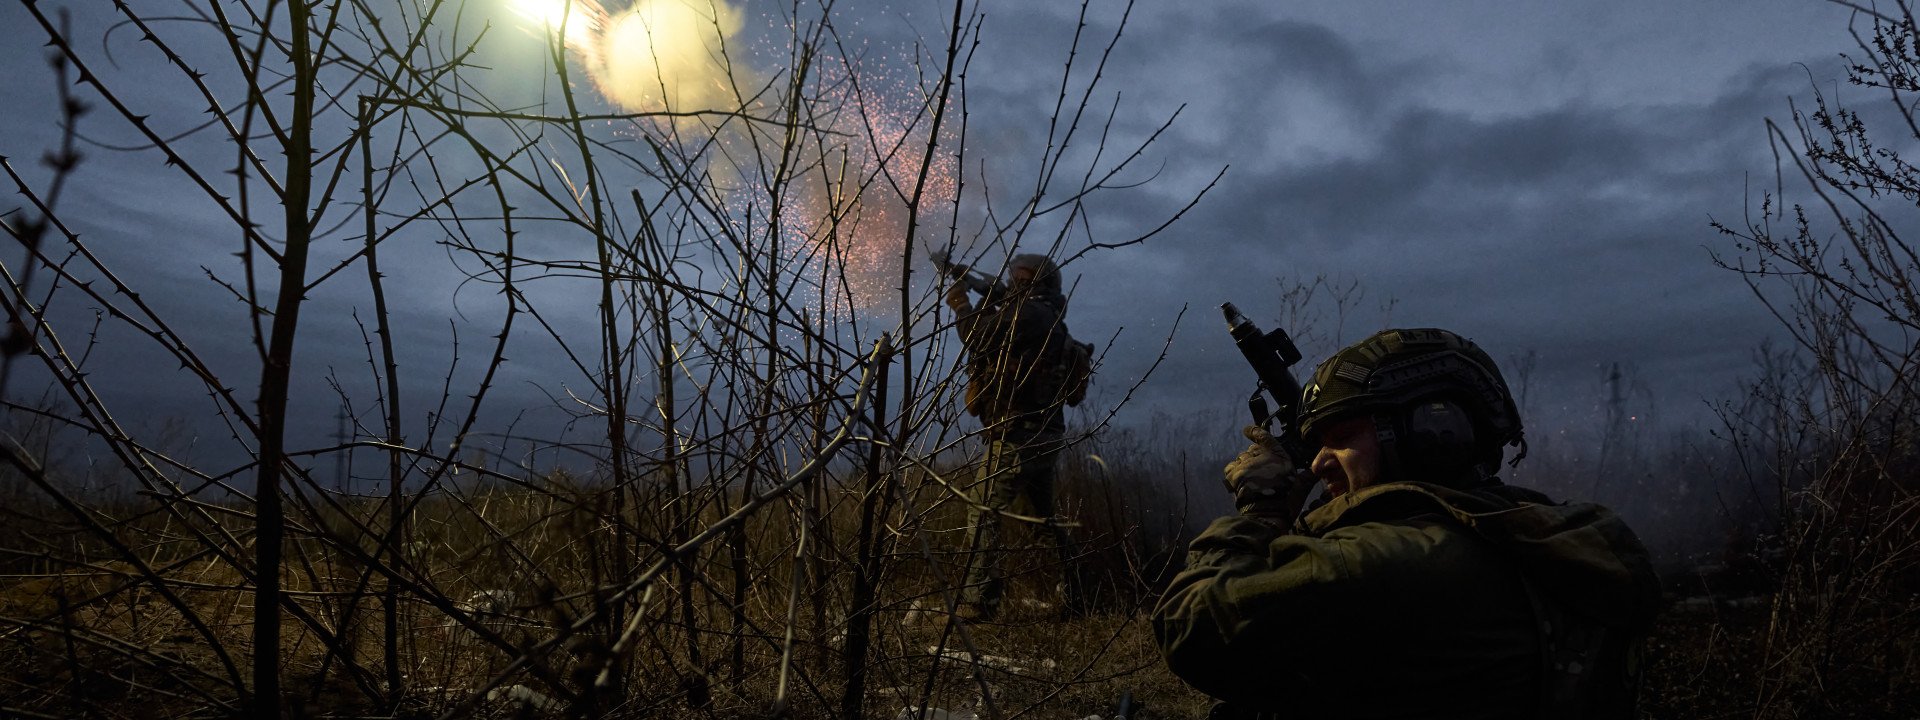 The US Has Approved a $61 Billion Aid Package to Ukraine. How Could It Impact the War?